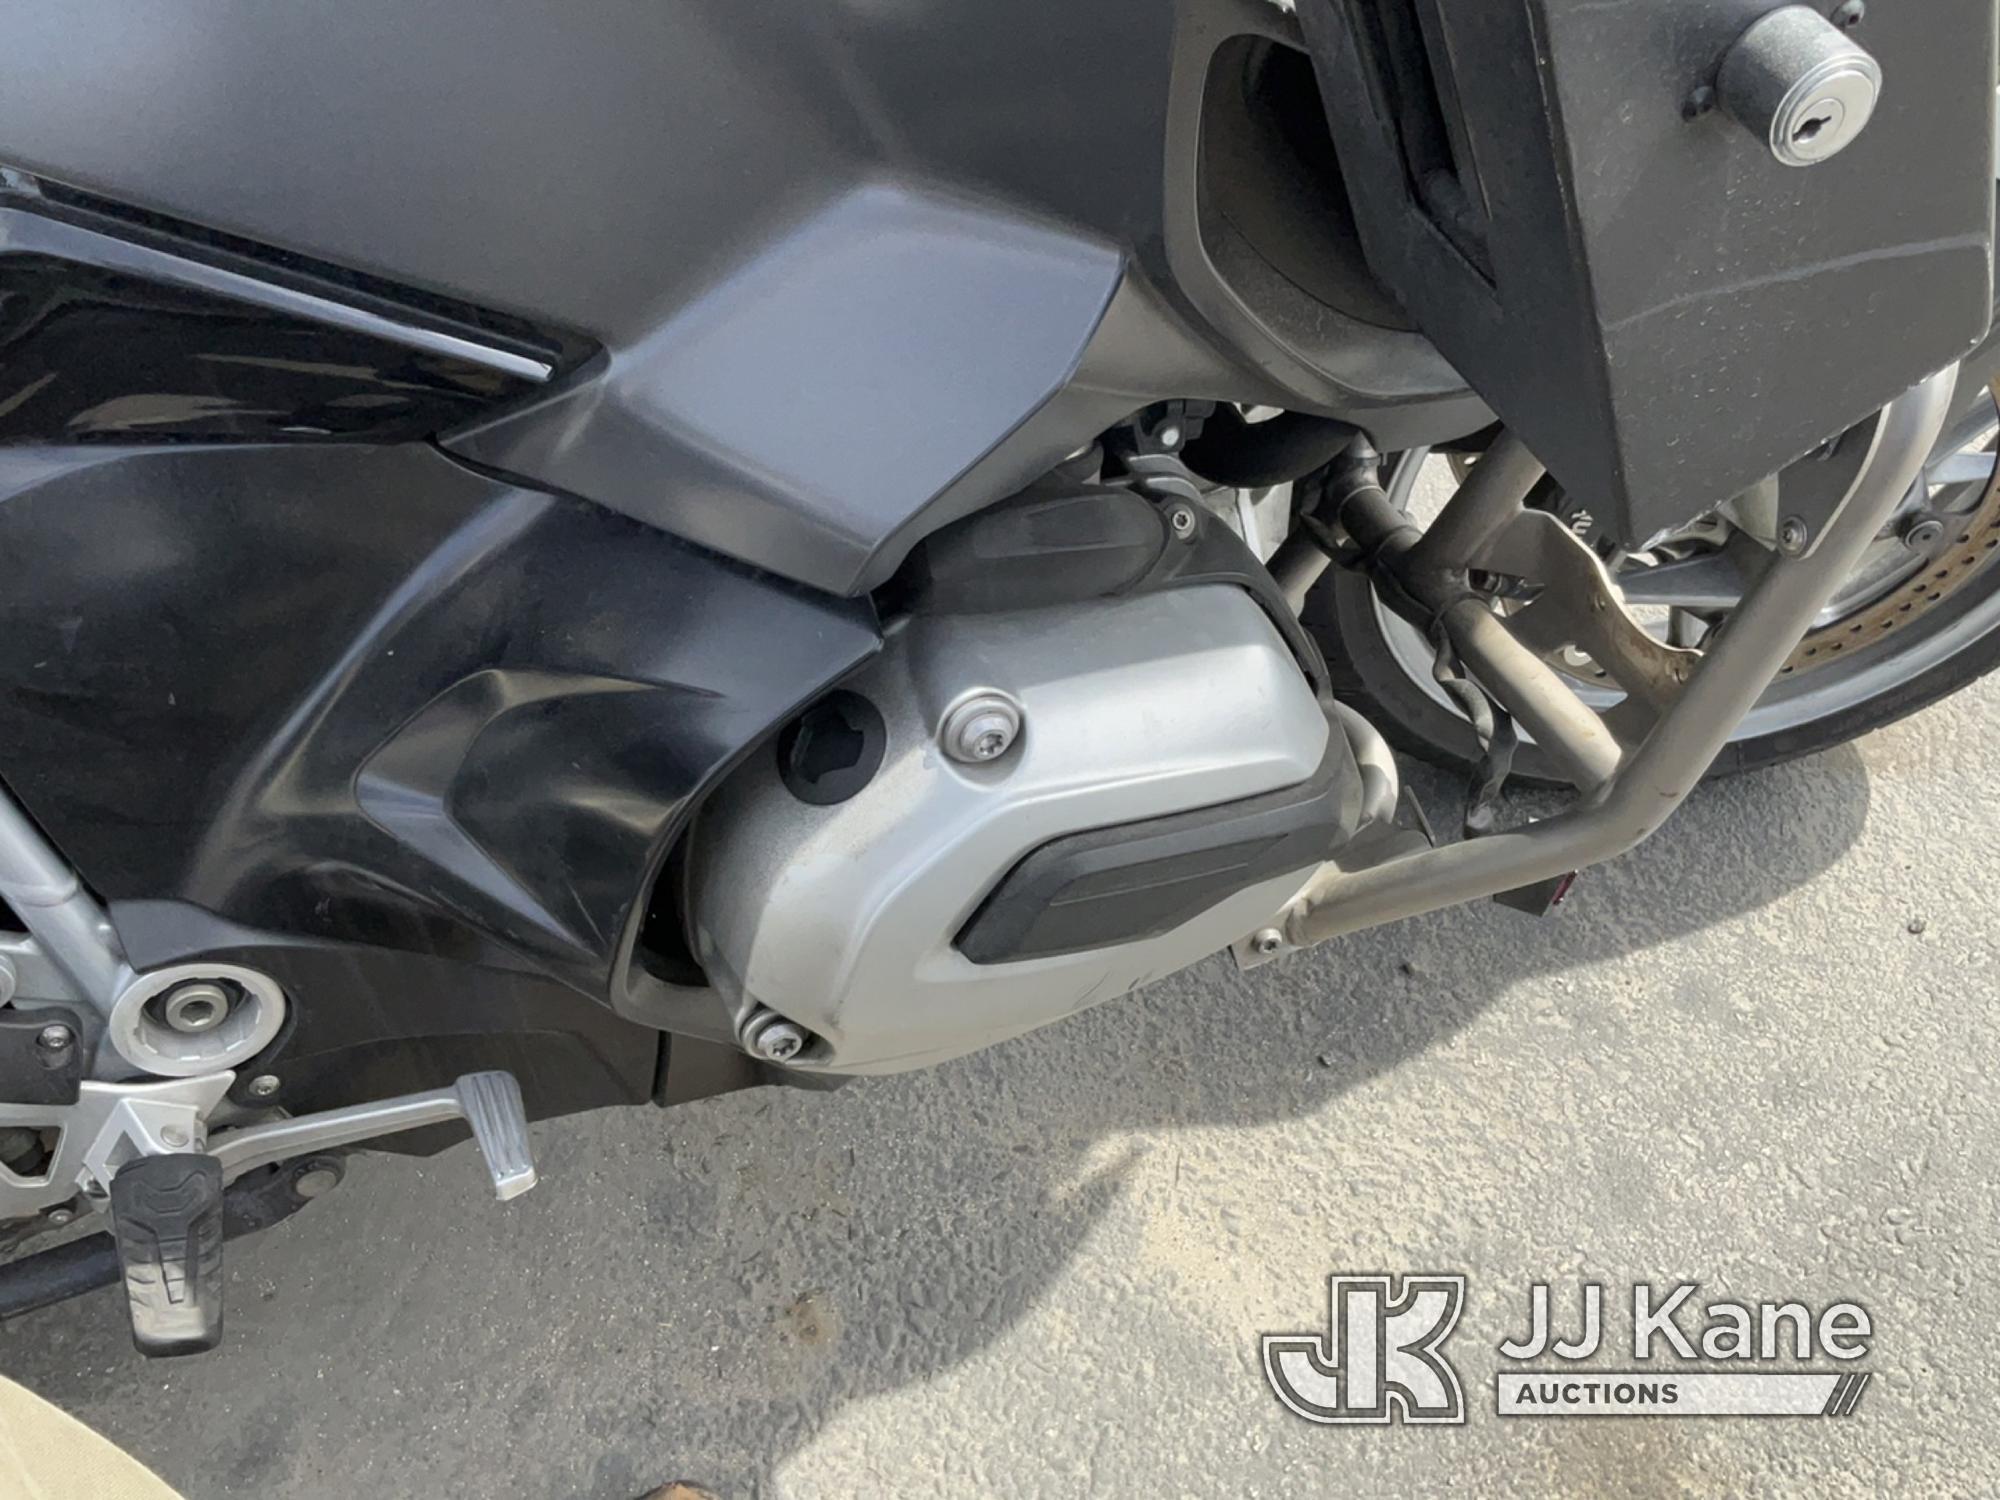 (Jurupa Valley, CA) 2016 BMW R1200RT Motorcycle Runs But Does Not Move ,Bad Clutch , Warning Lights